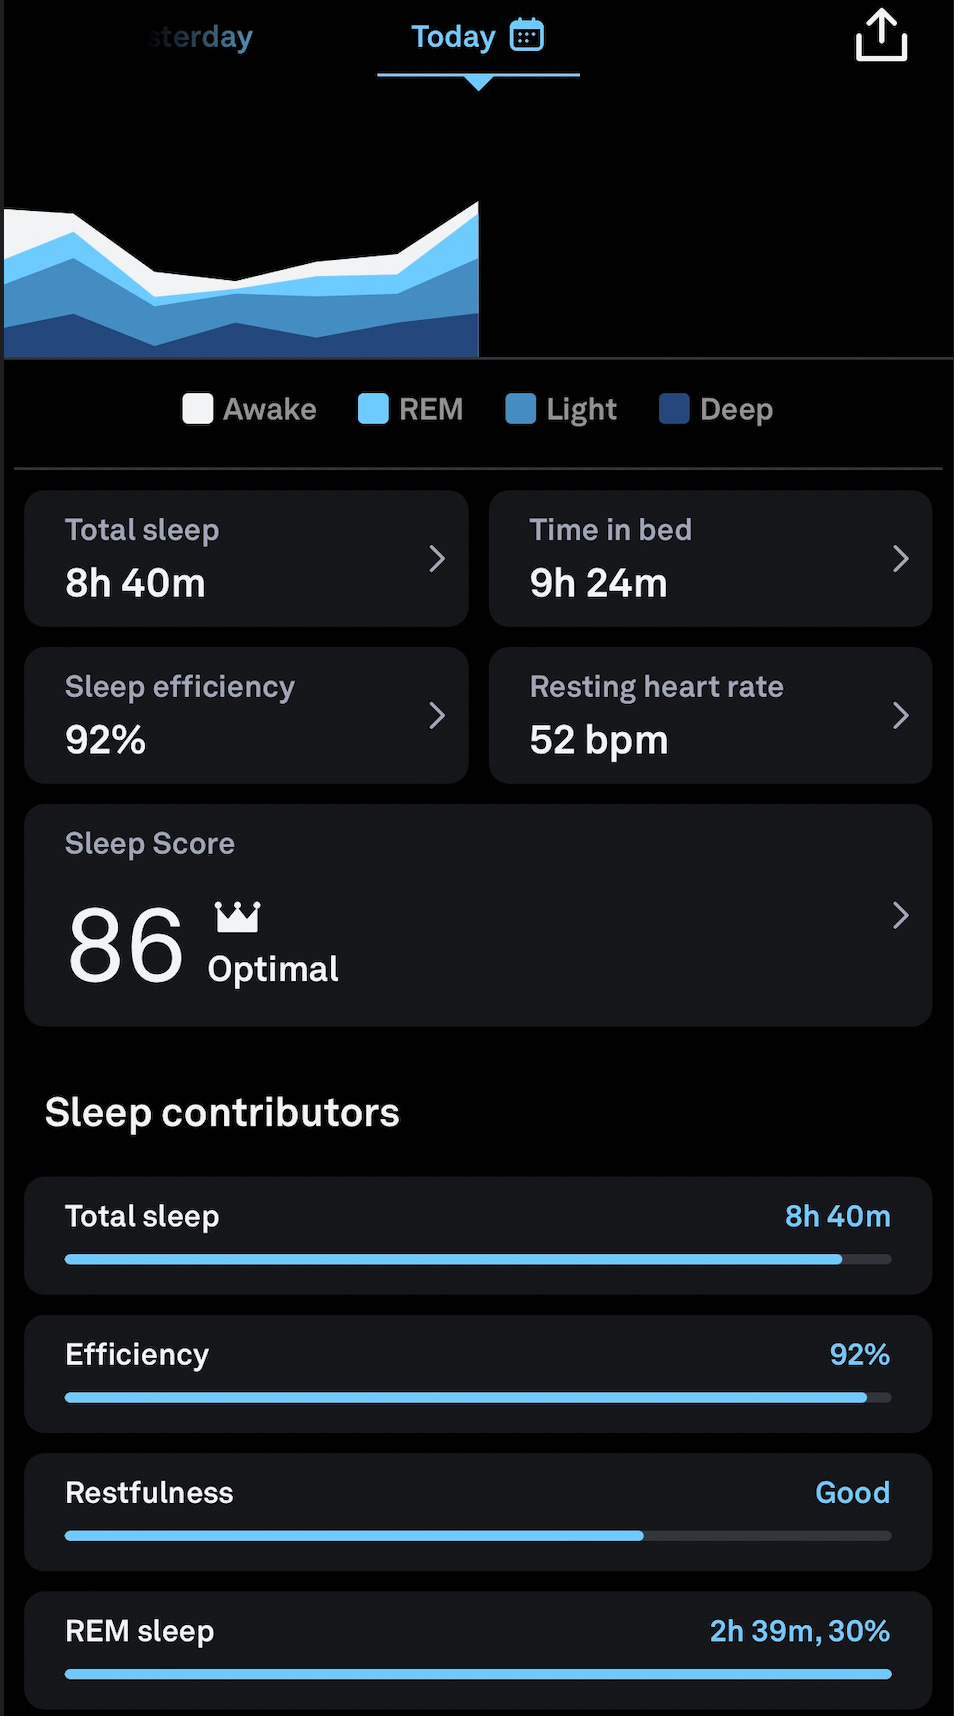 Screenshot of my data from the Oura app showing sleep data over time. This was me self-correcting after days of poor sleep!